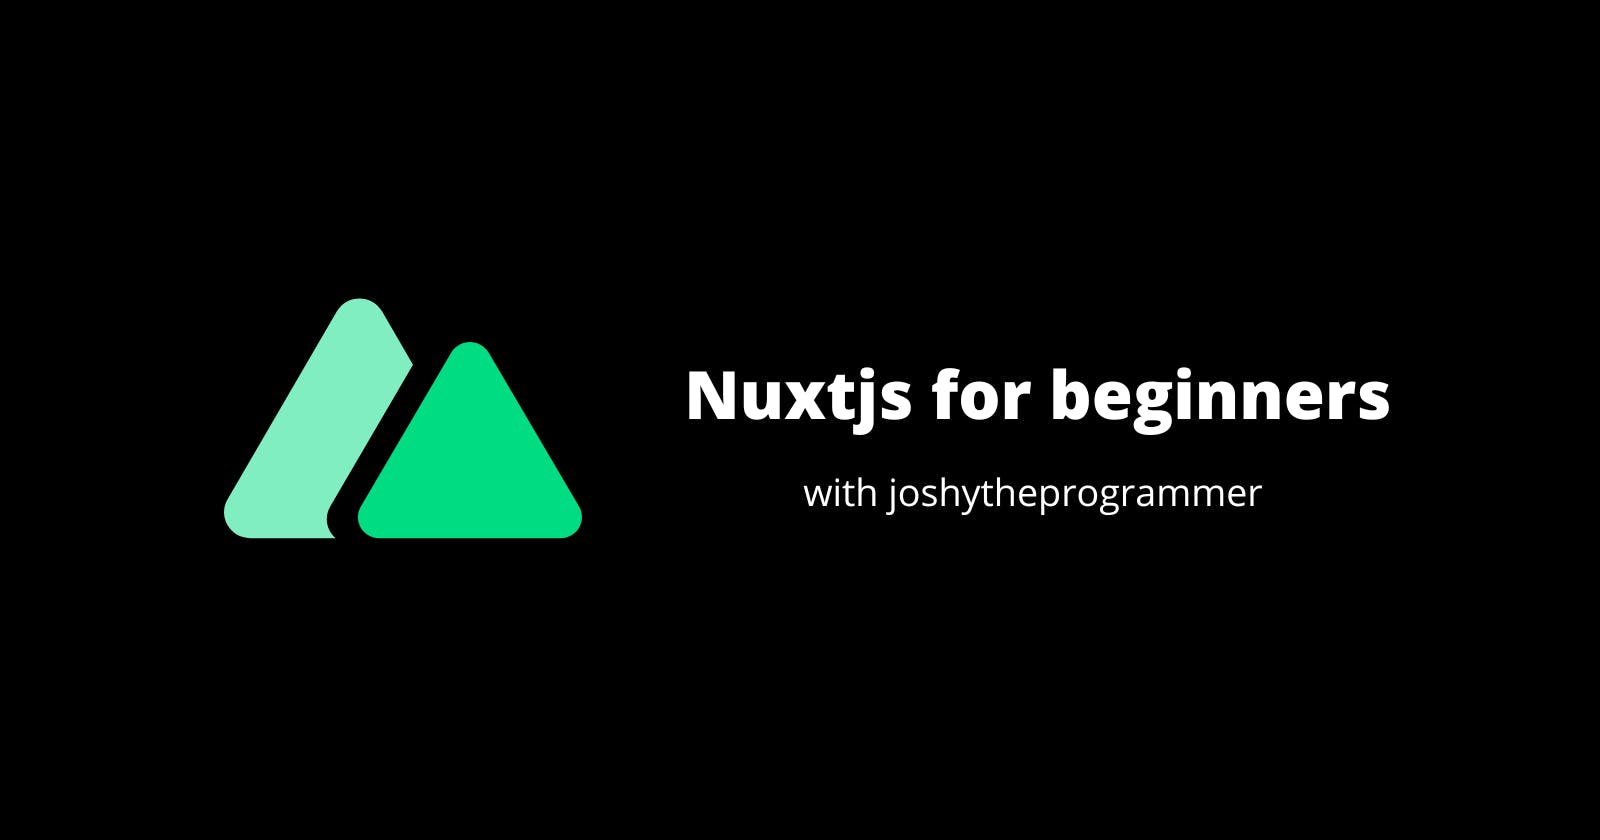 Getting started with Nuxtjs